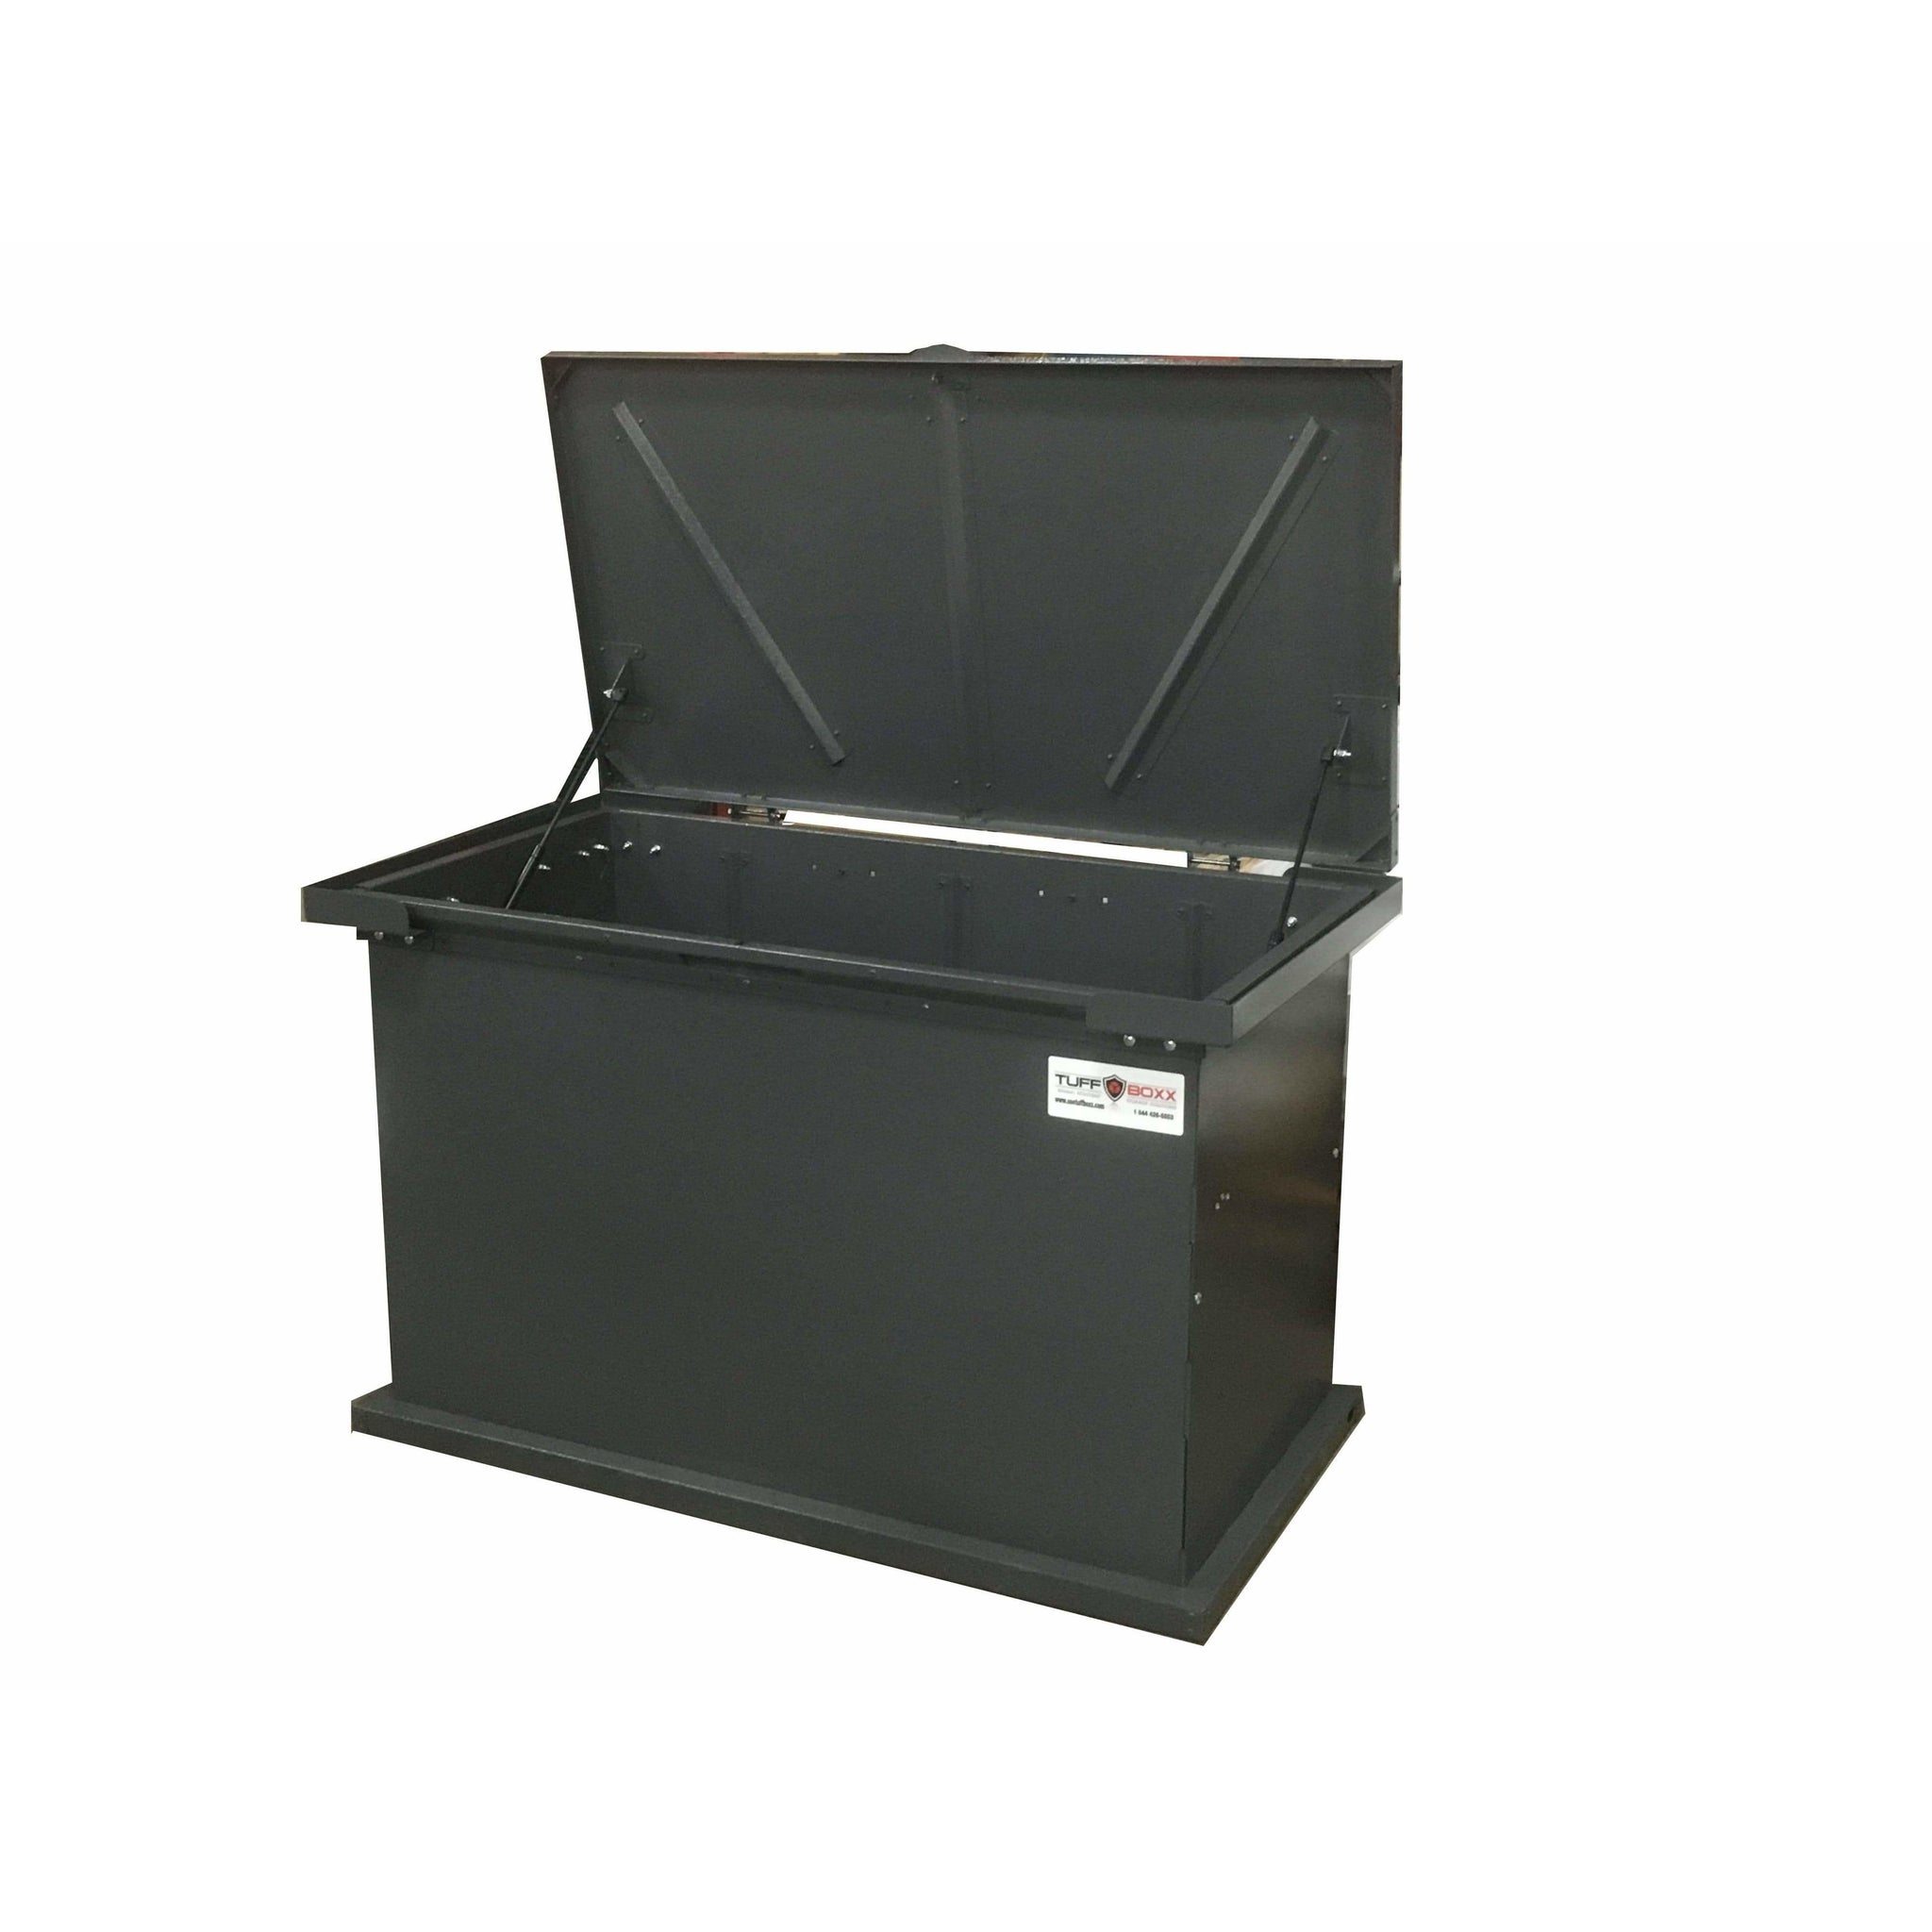 TuffBoxx Grizzly Animal Resistant 197-Gallon Steel Trash Receptacle